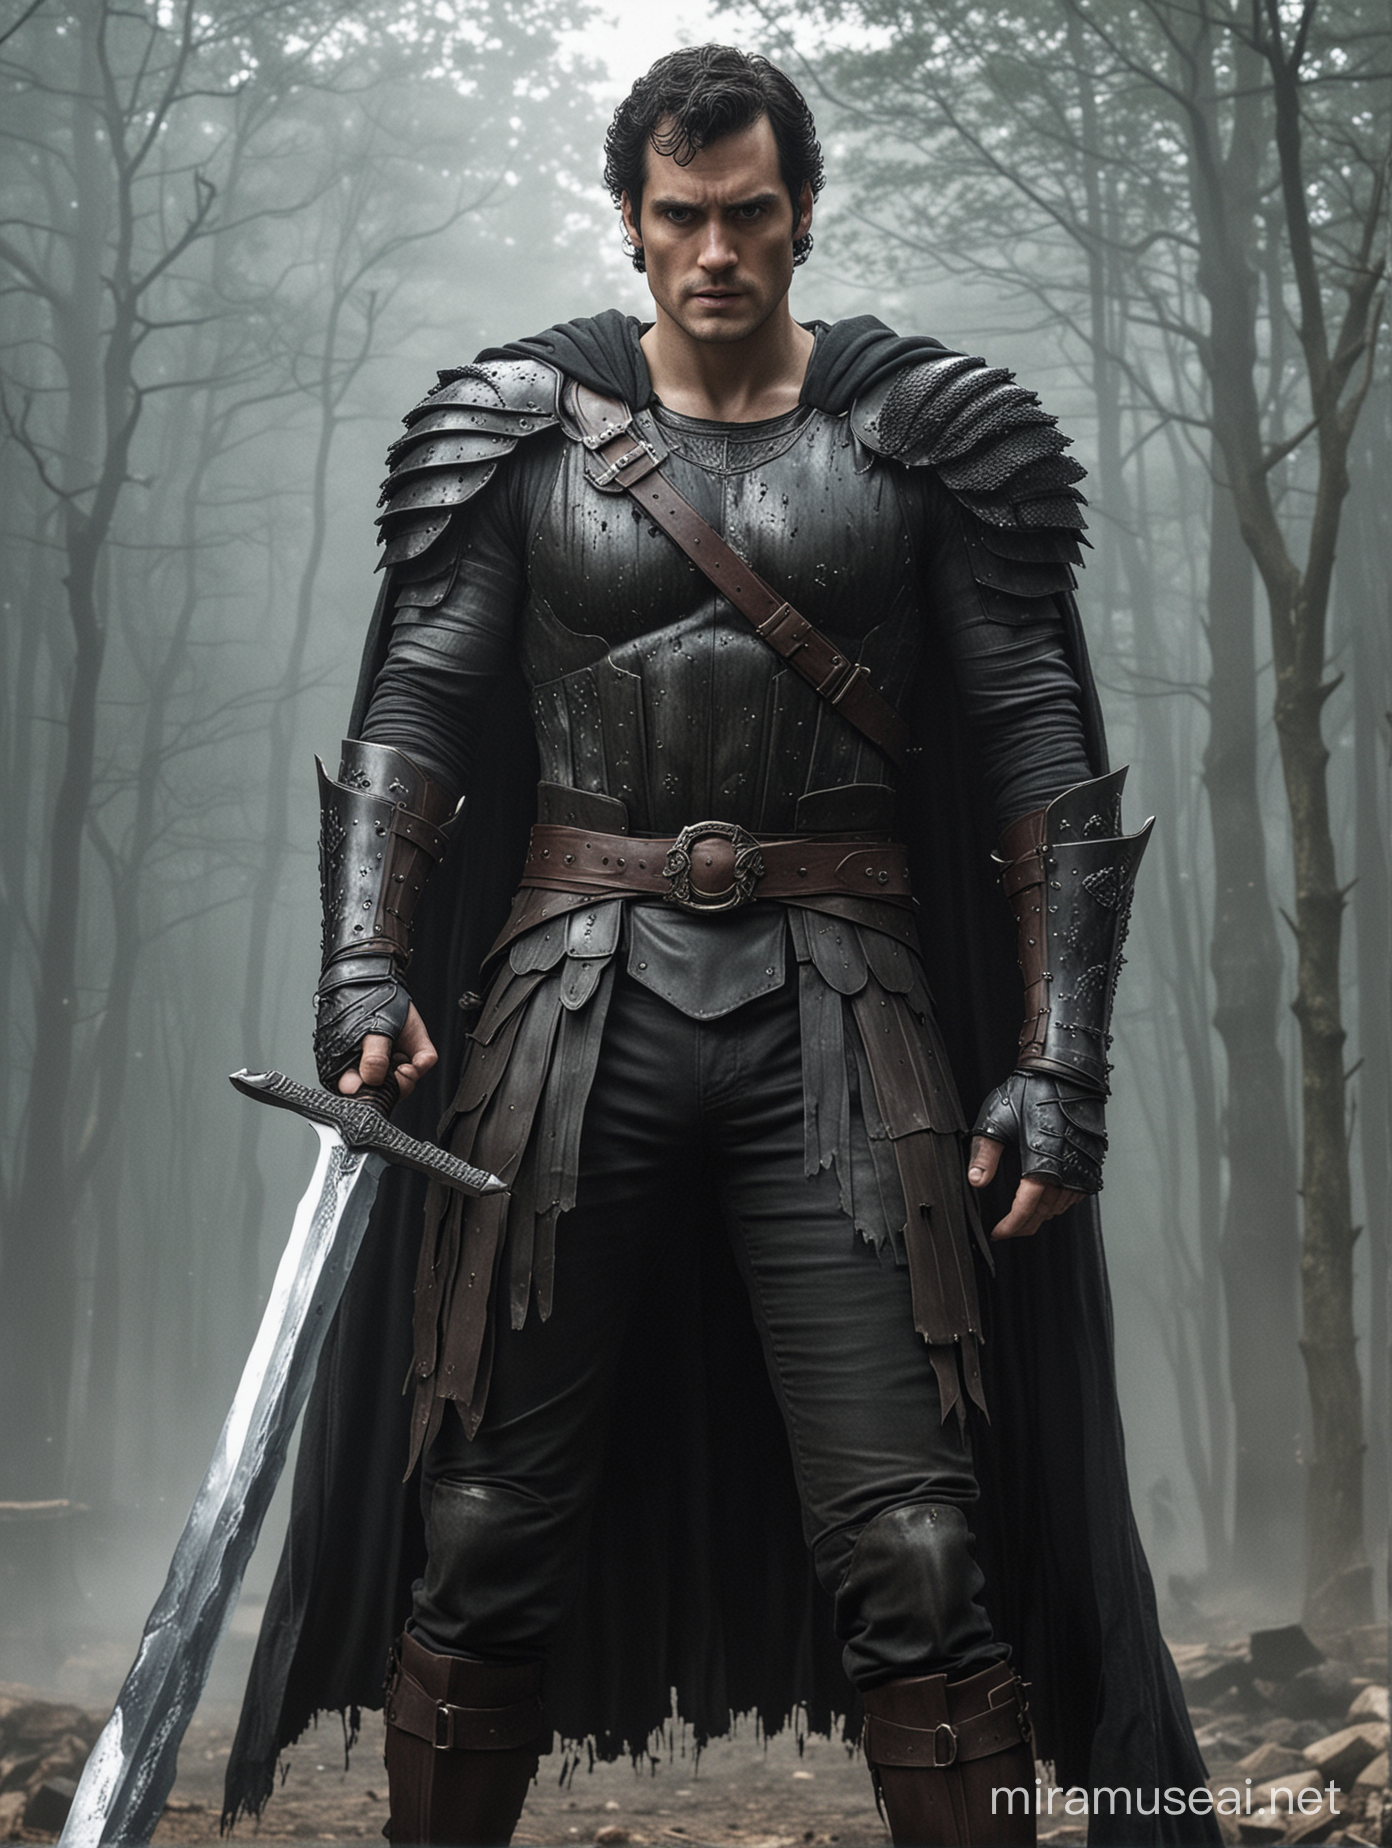 Henry Cavill as Guts from Berserk Holding a Massive Sword with Severed Hand